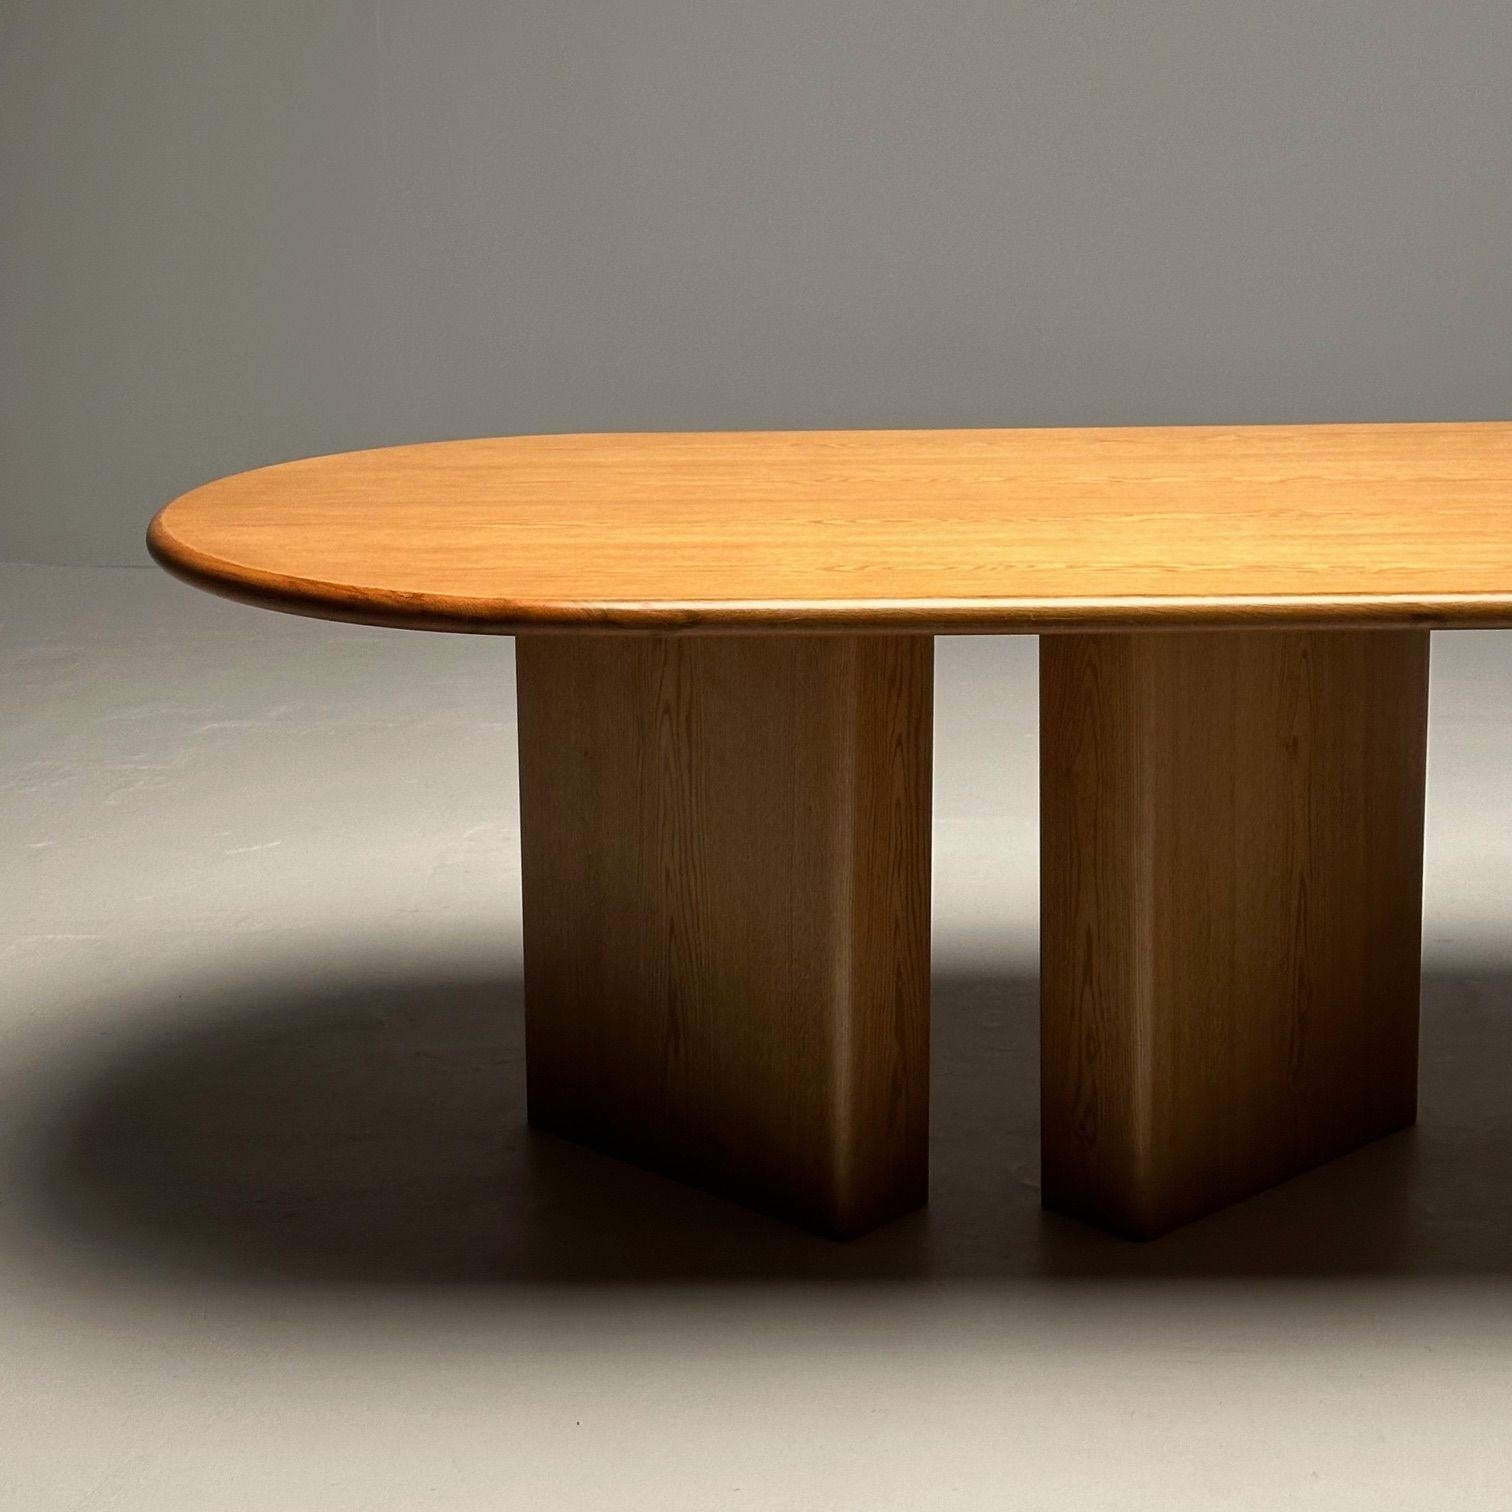 Contemporary Handcrafted Oval Dining Table, Solid Oak, Modern Pedestal Base For Sale 3